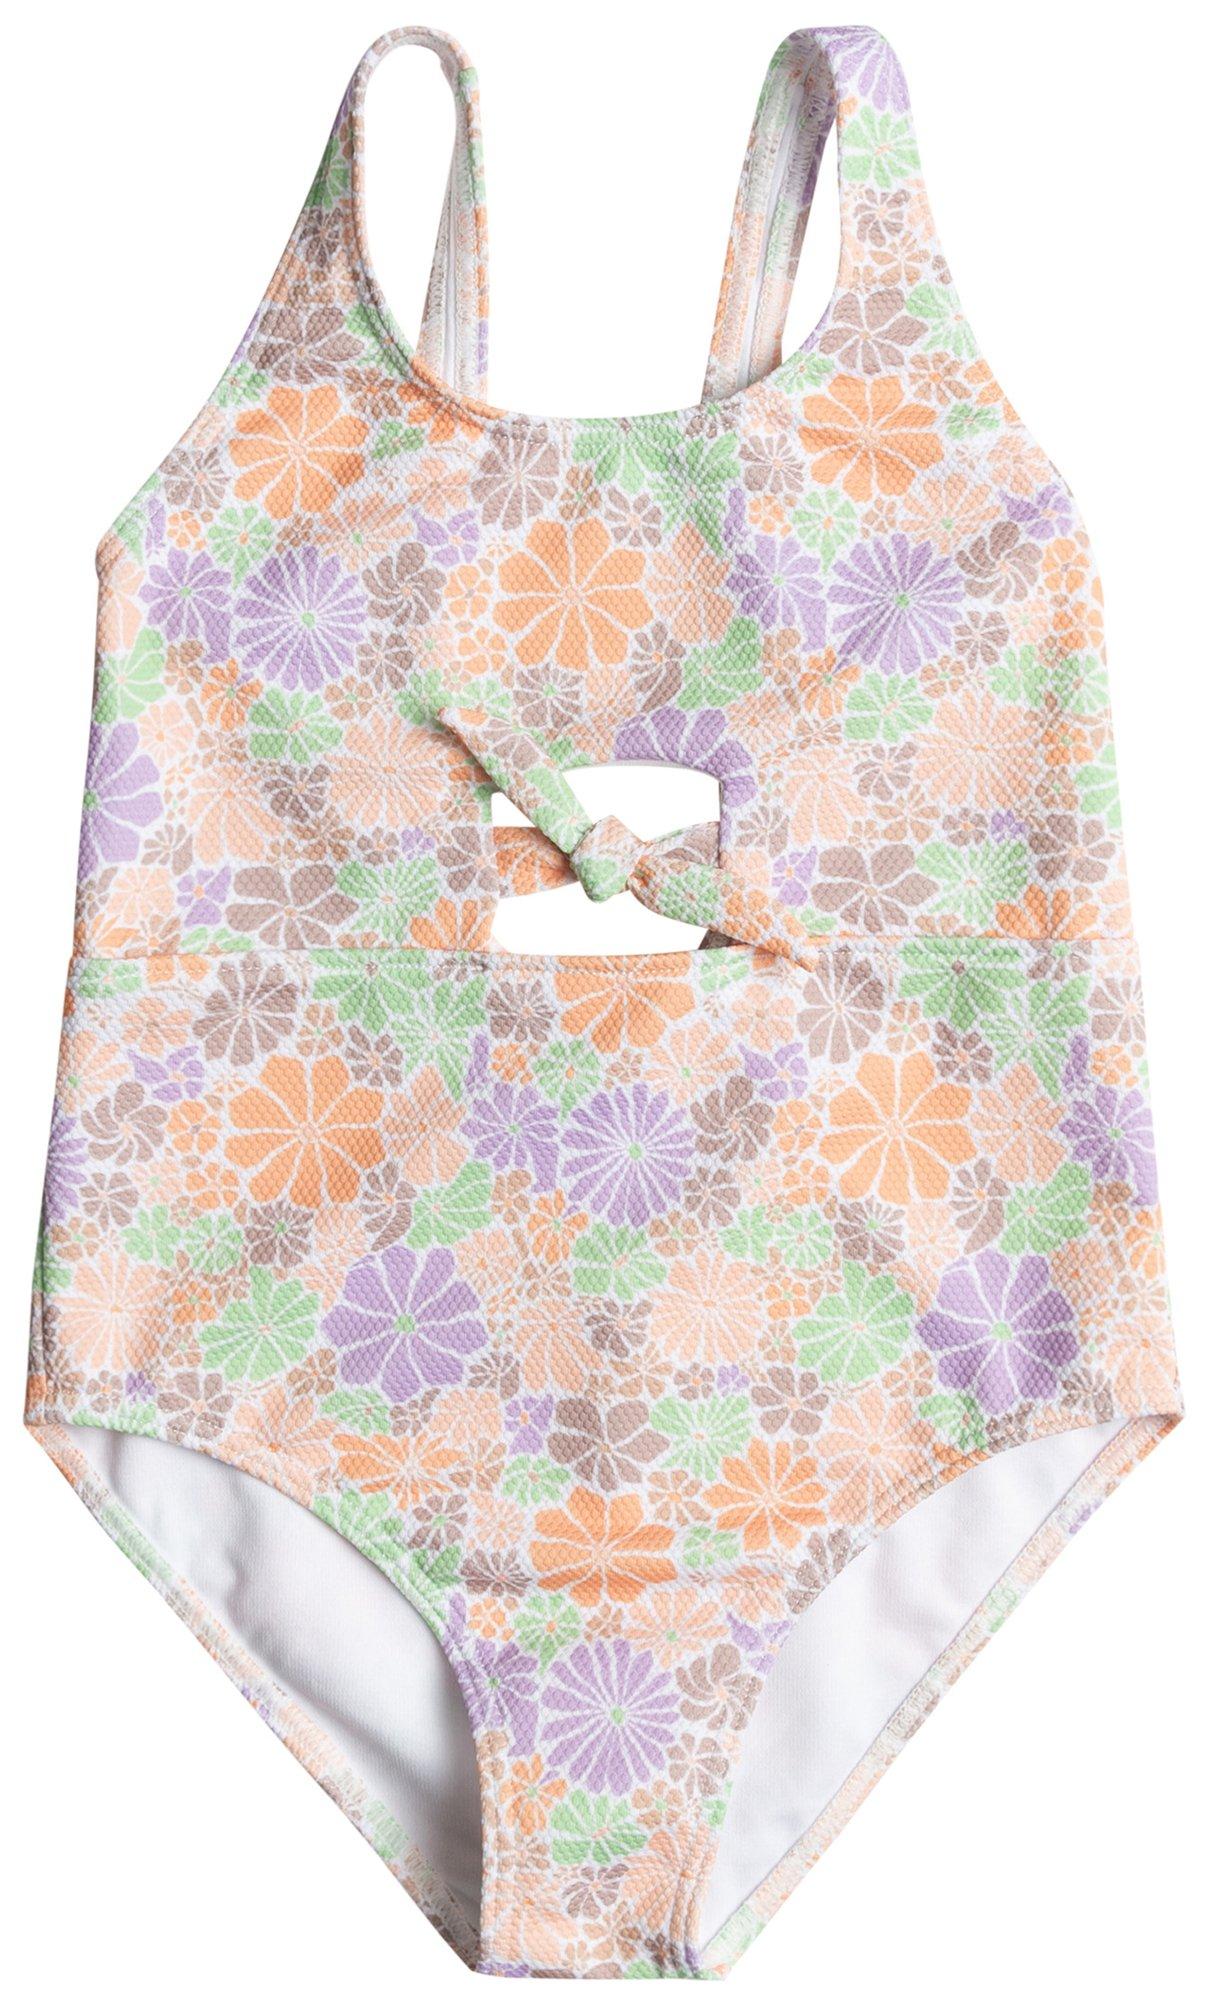 Roxy Big Girls 1-pc. All About Sol Swimsuits